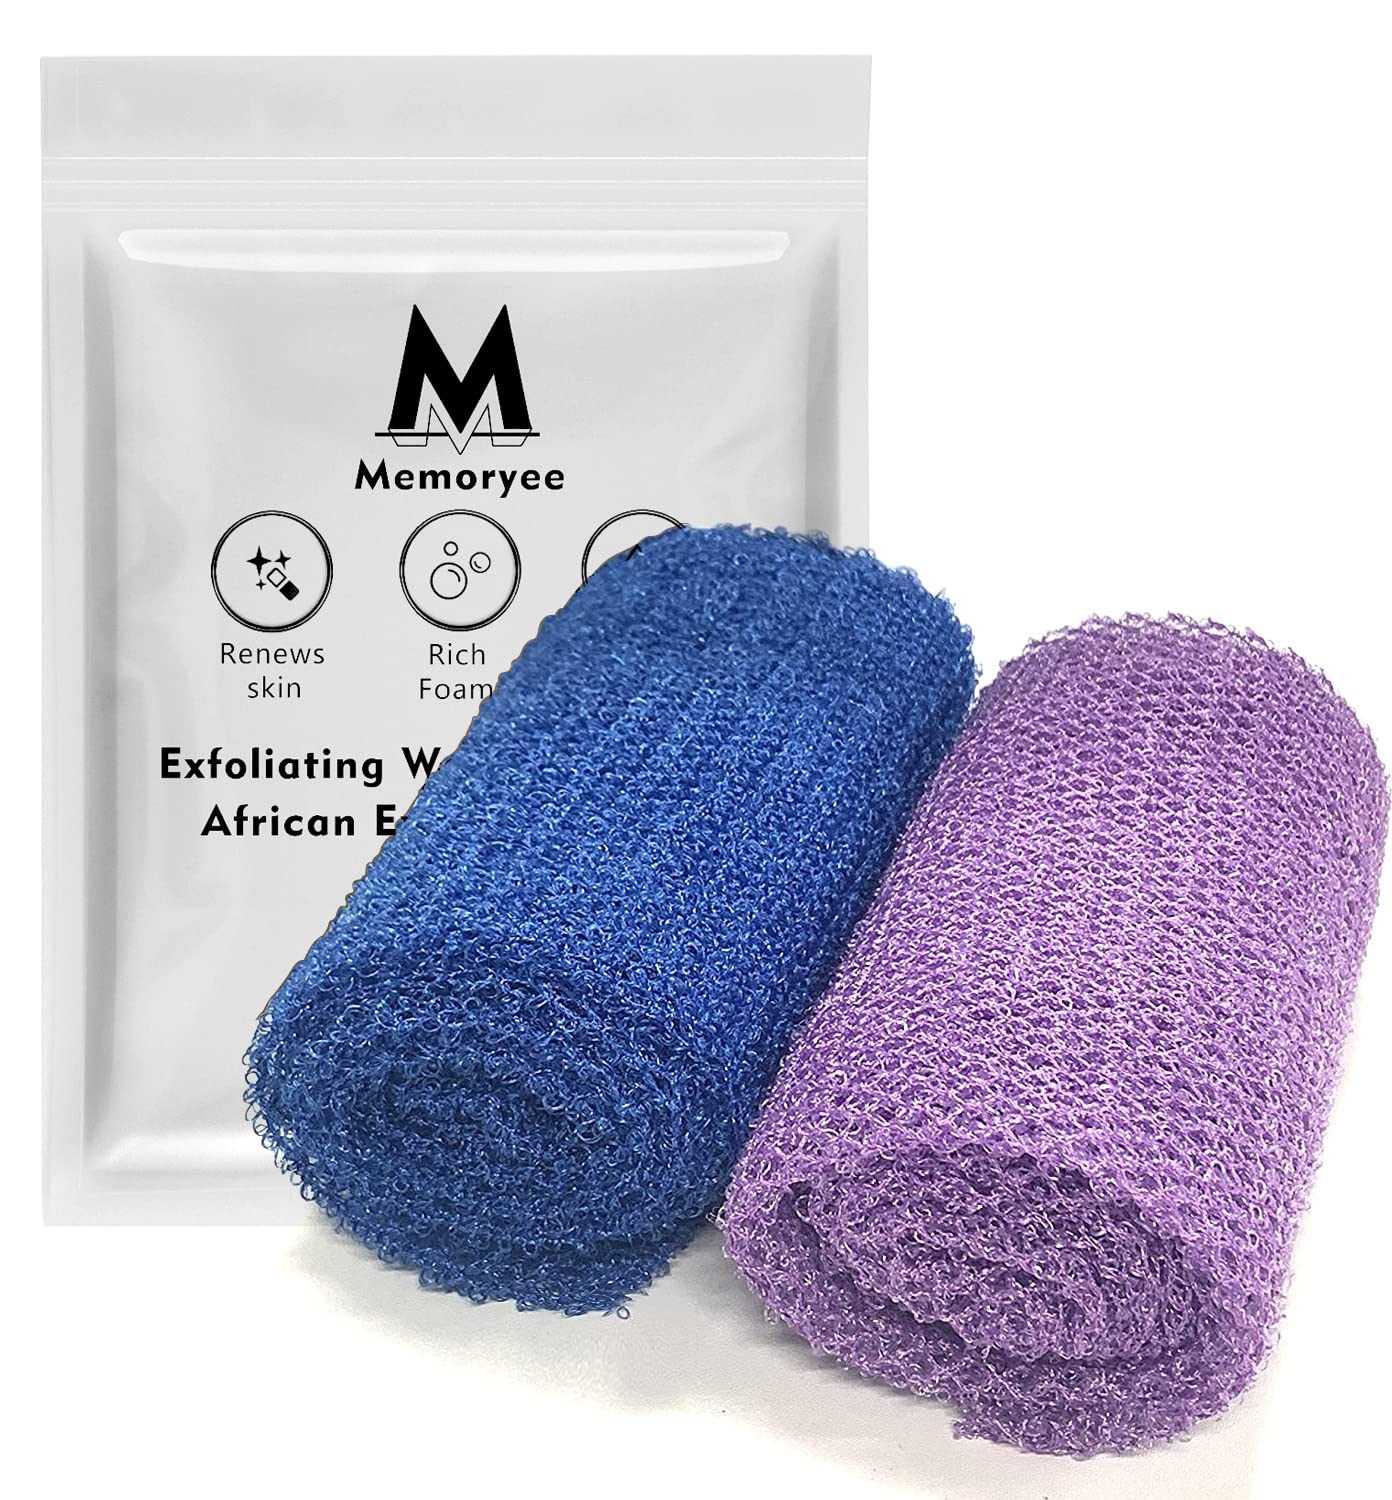 Exfoliating Washcloth Towel Body Scrubber Loofah African Net Bathing Sponge Back Scrubber for Shower Mesh Pouf Sponge Skin Smoother for Daily Use or Stocking Stuffer Bathroom Accessories 2pcs